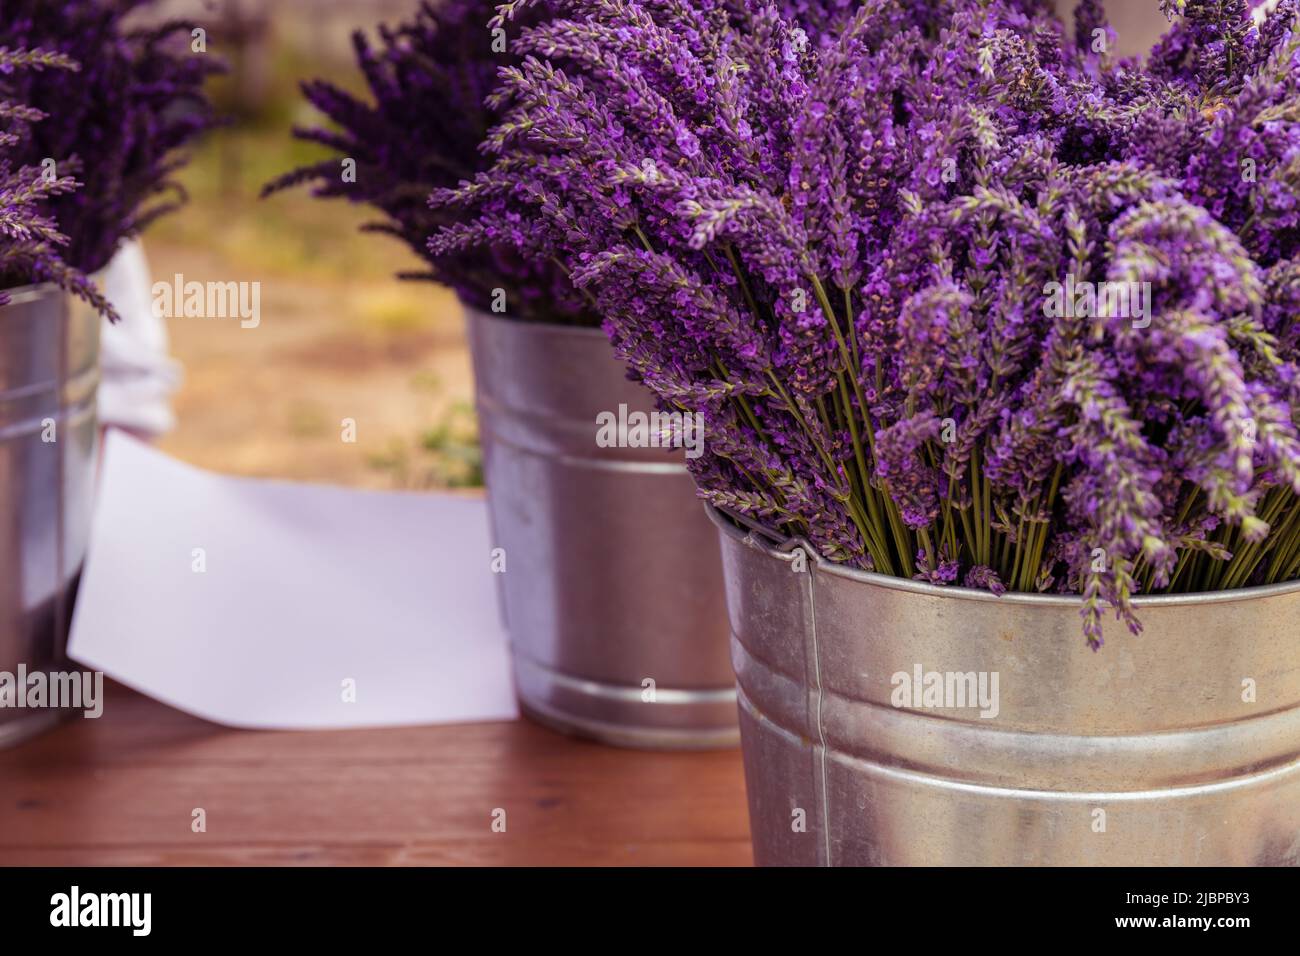 Bunches of Purple Lavender in Metal Buckets For Sale Stock Photo